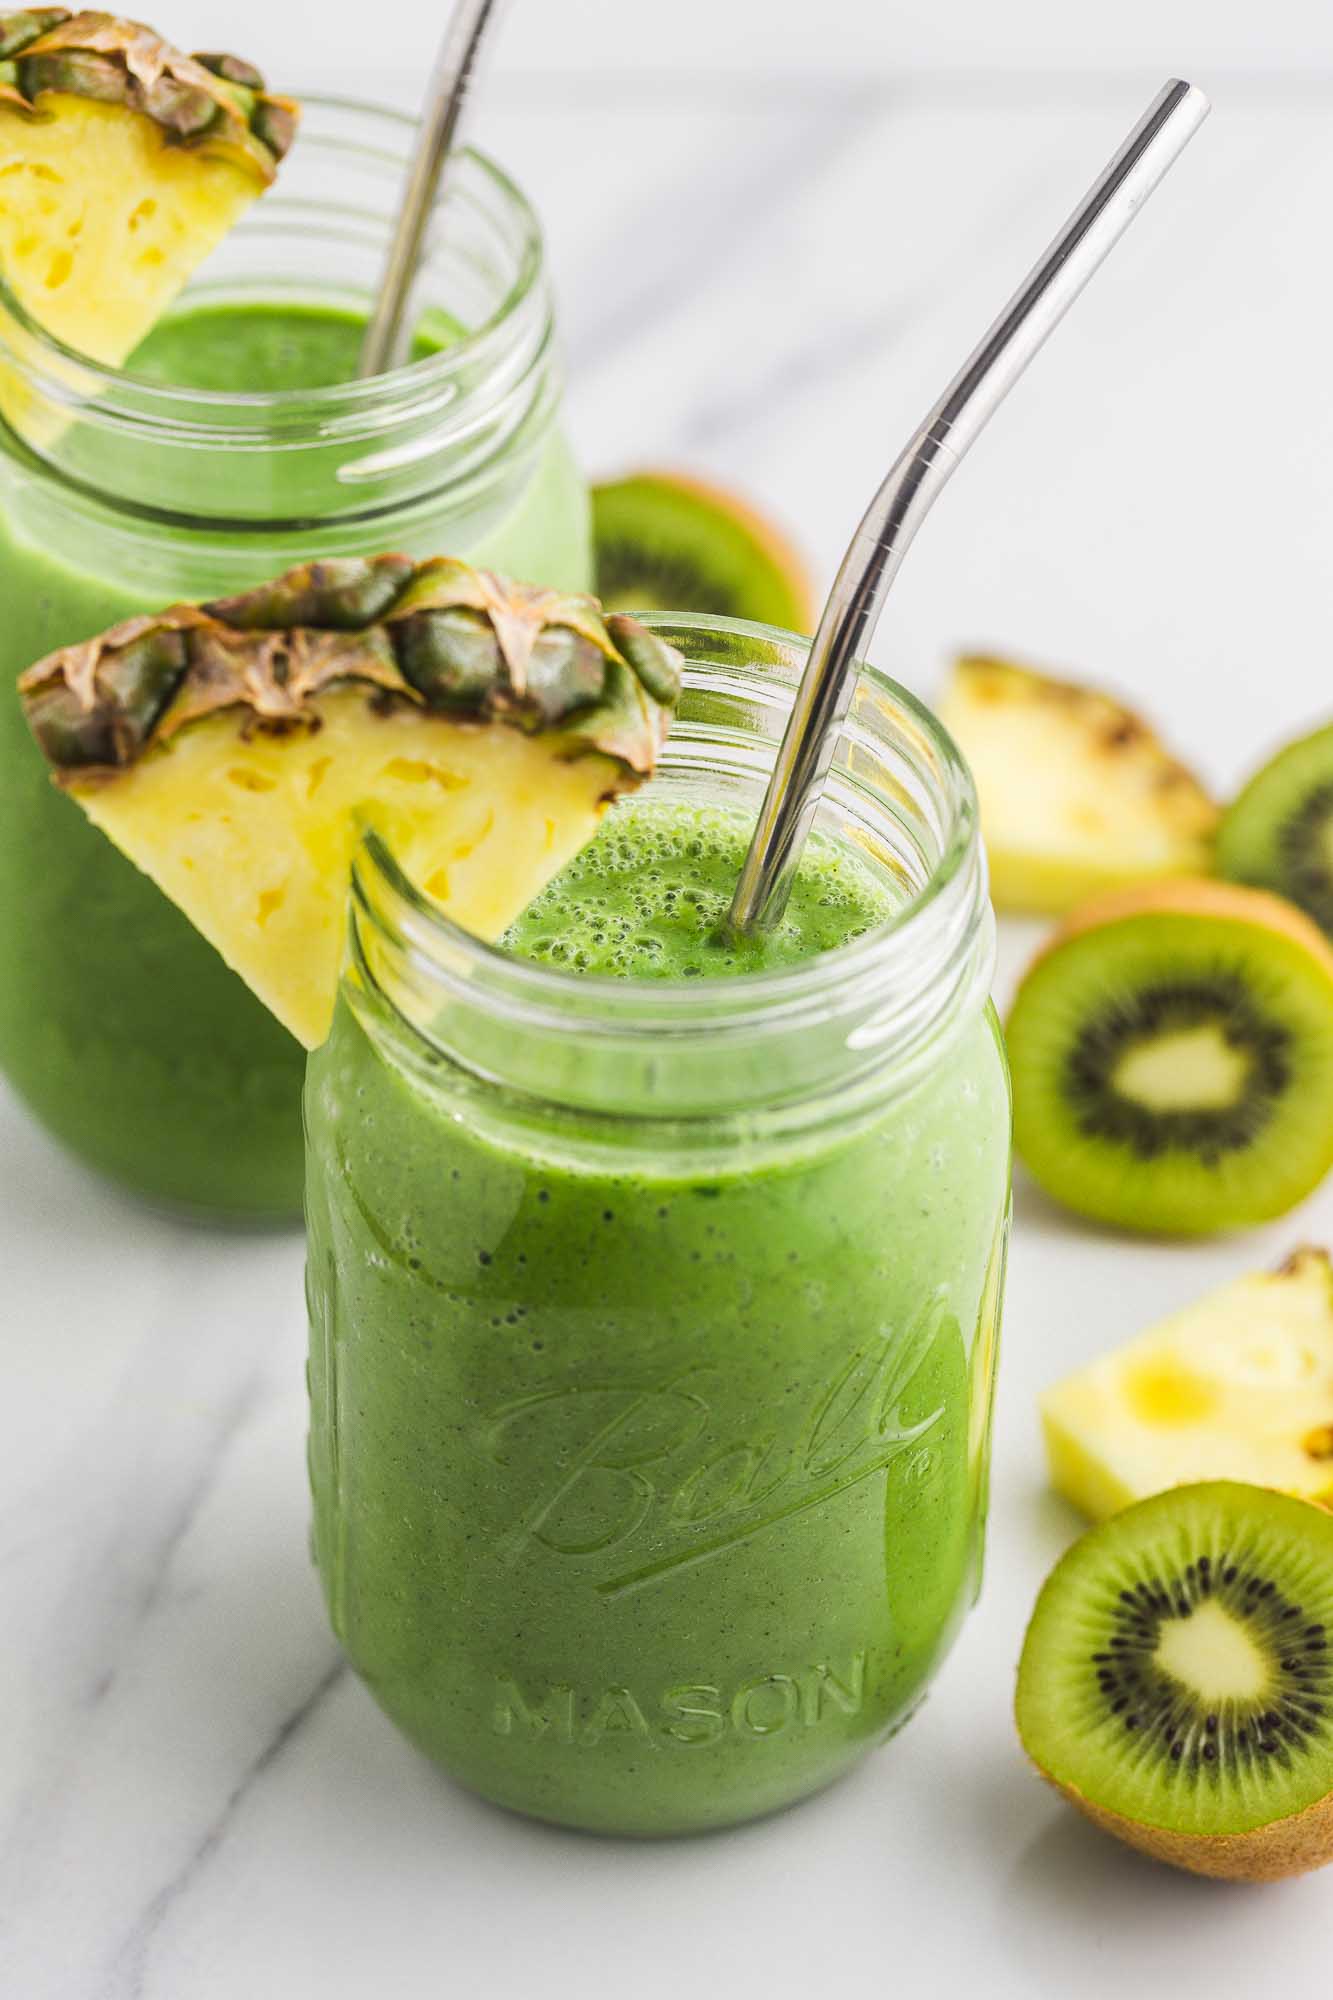 Spinach smoothie served in mason jars, with fresh pineapple slices, halved kiwi, and metal straws